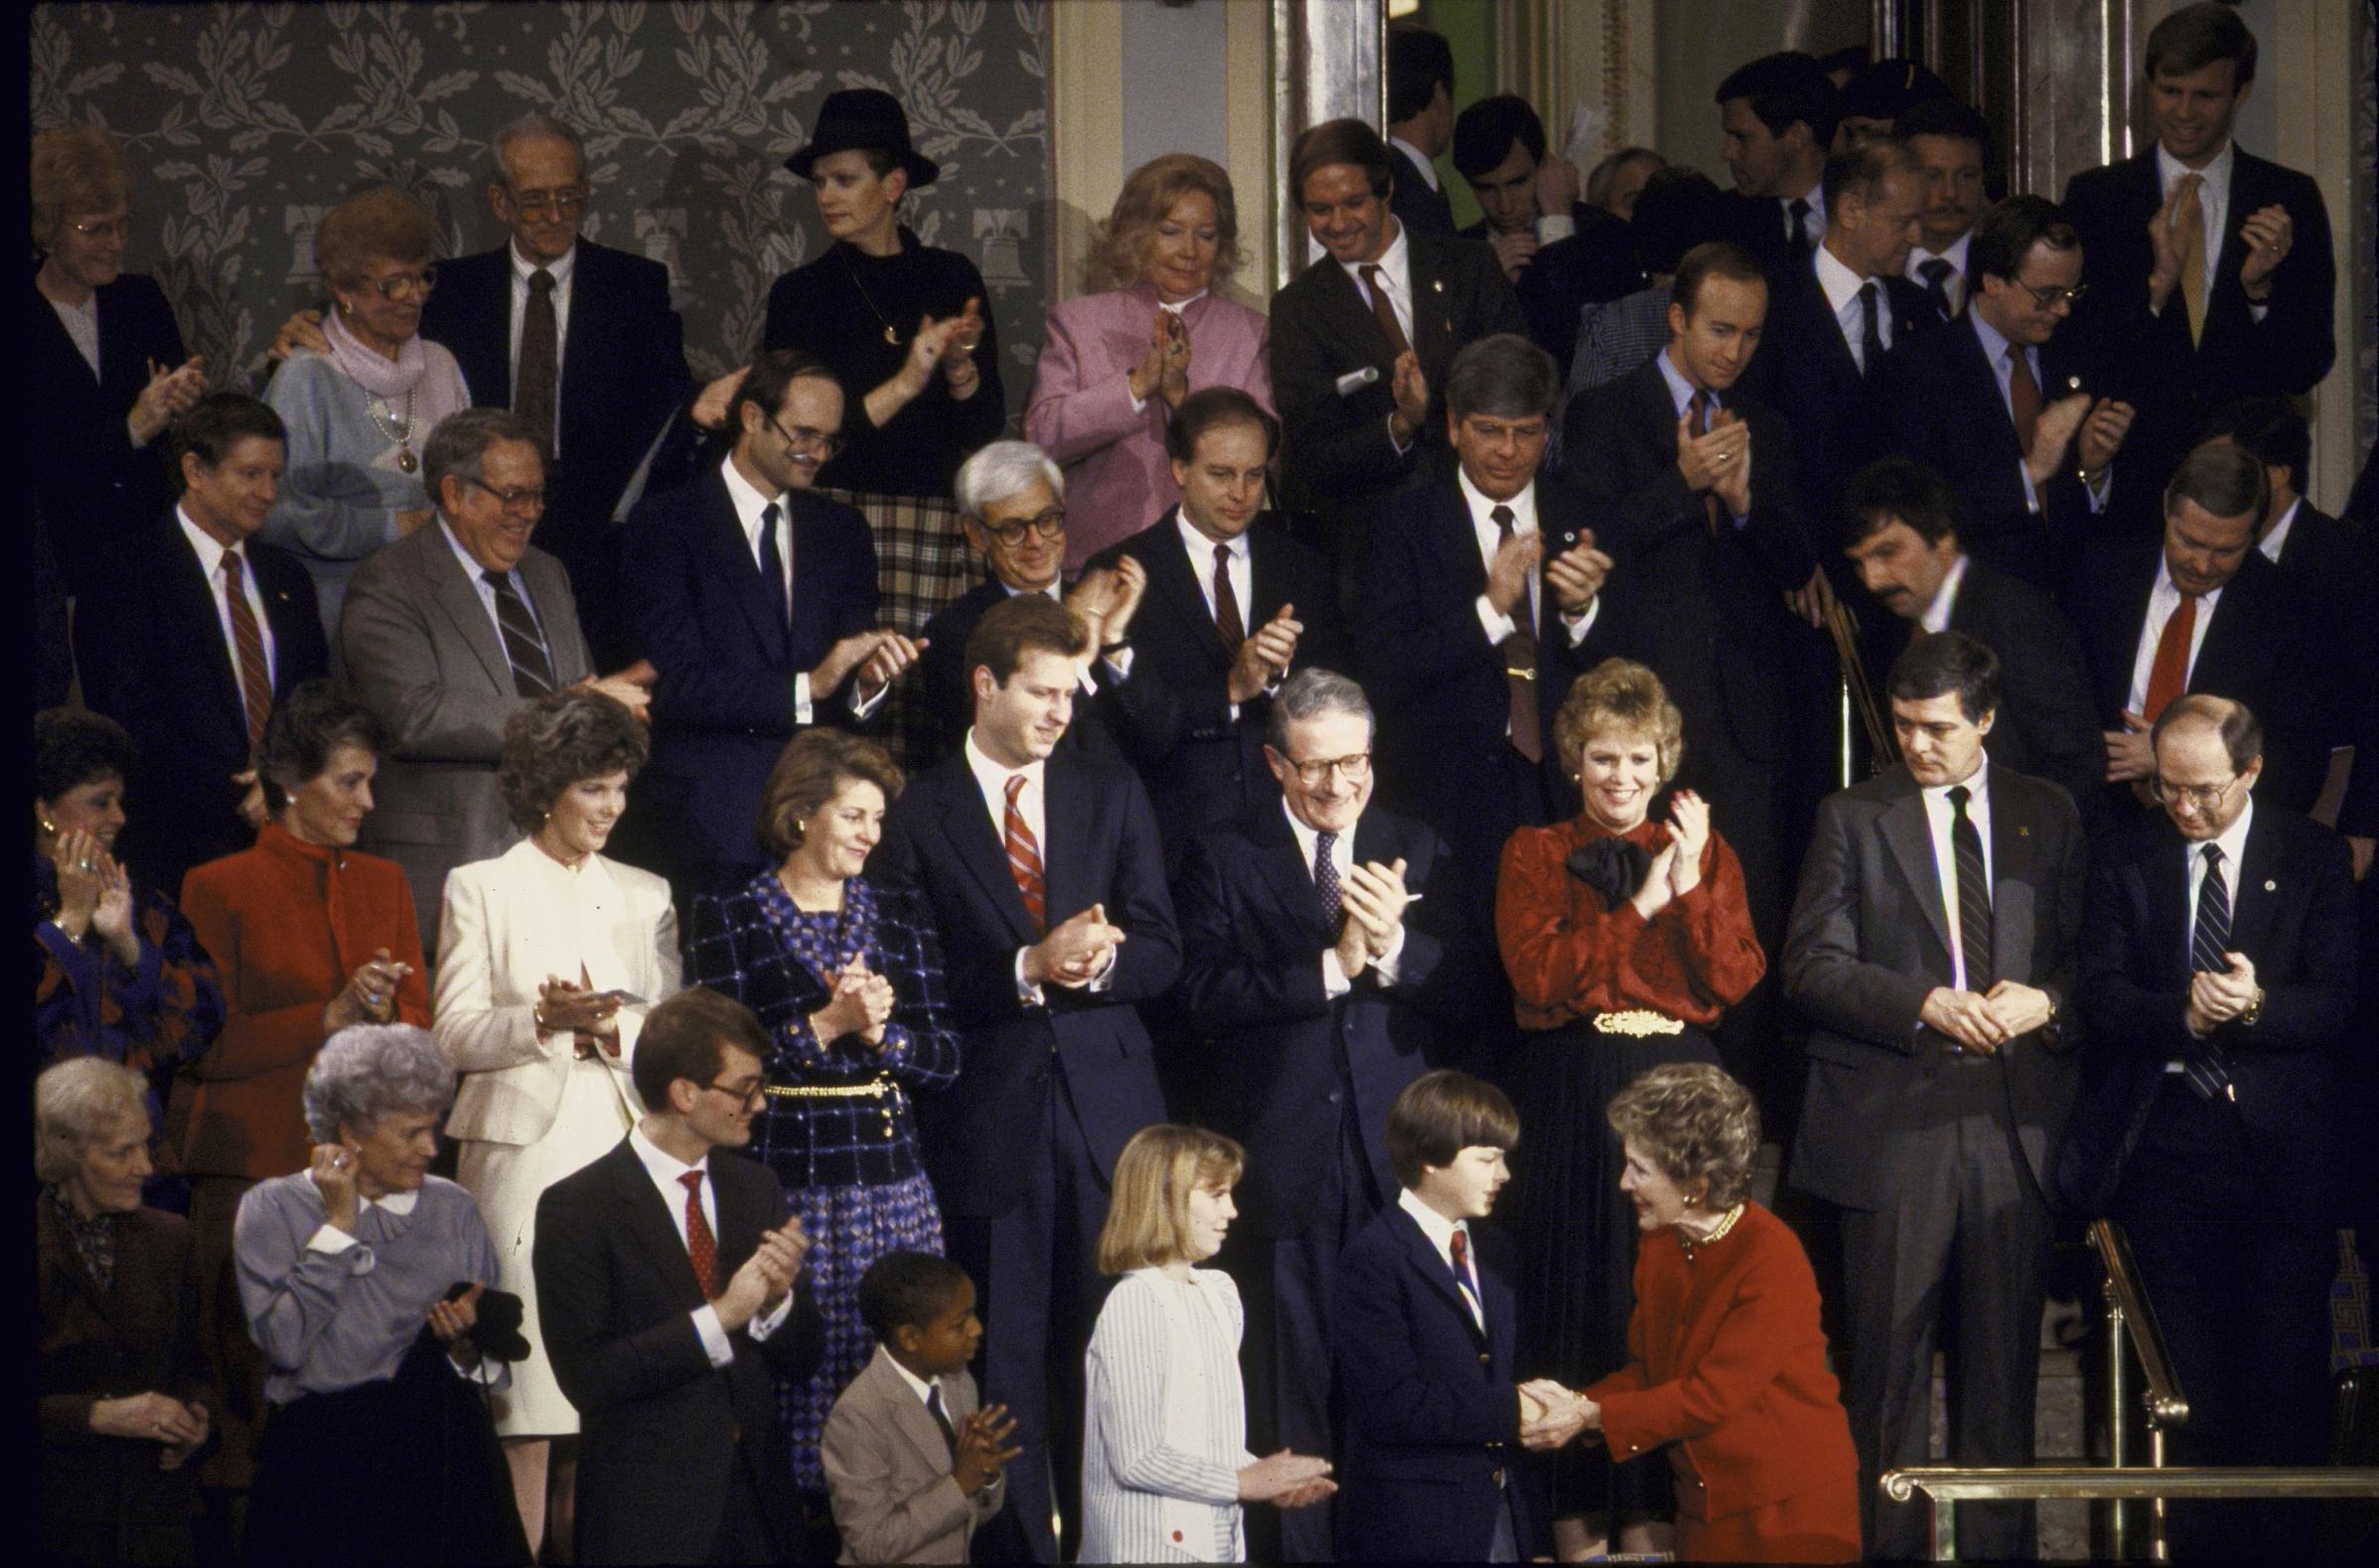 First Lady Nancy Reagan (front in red dress) at Reagan's